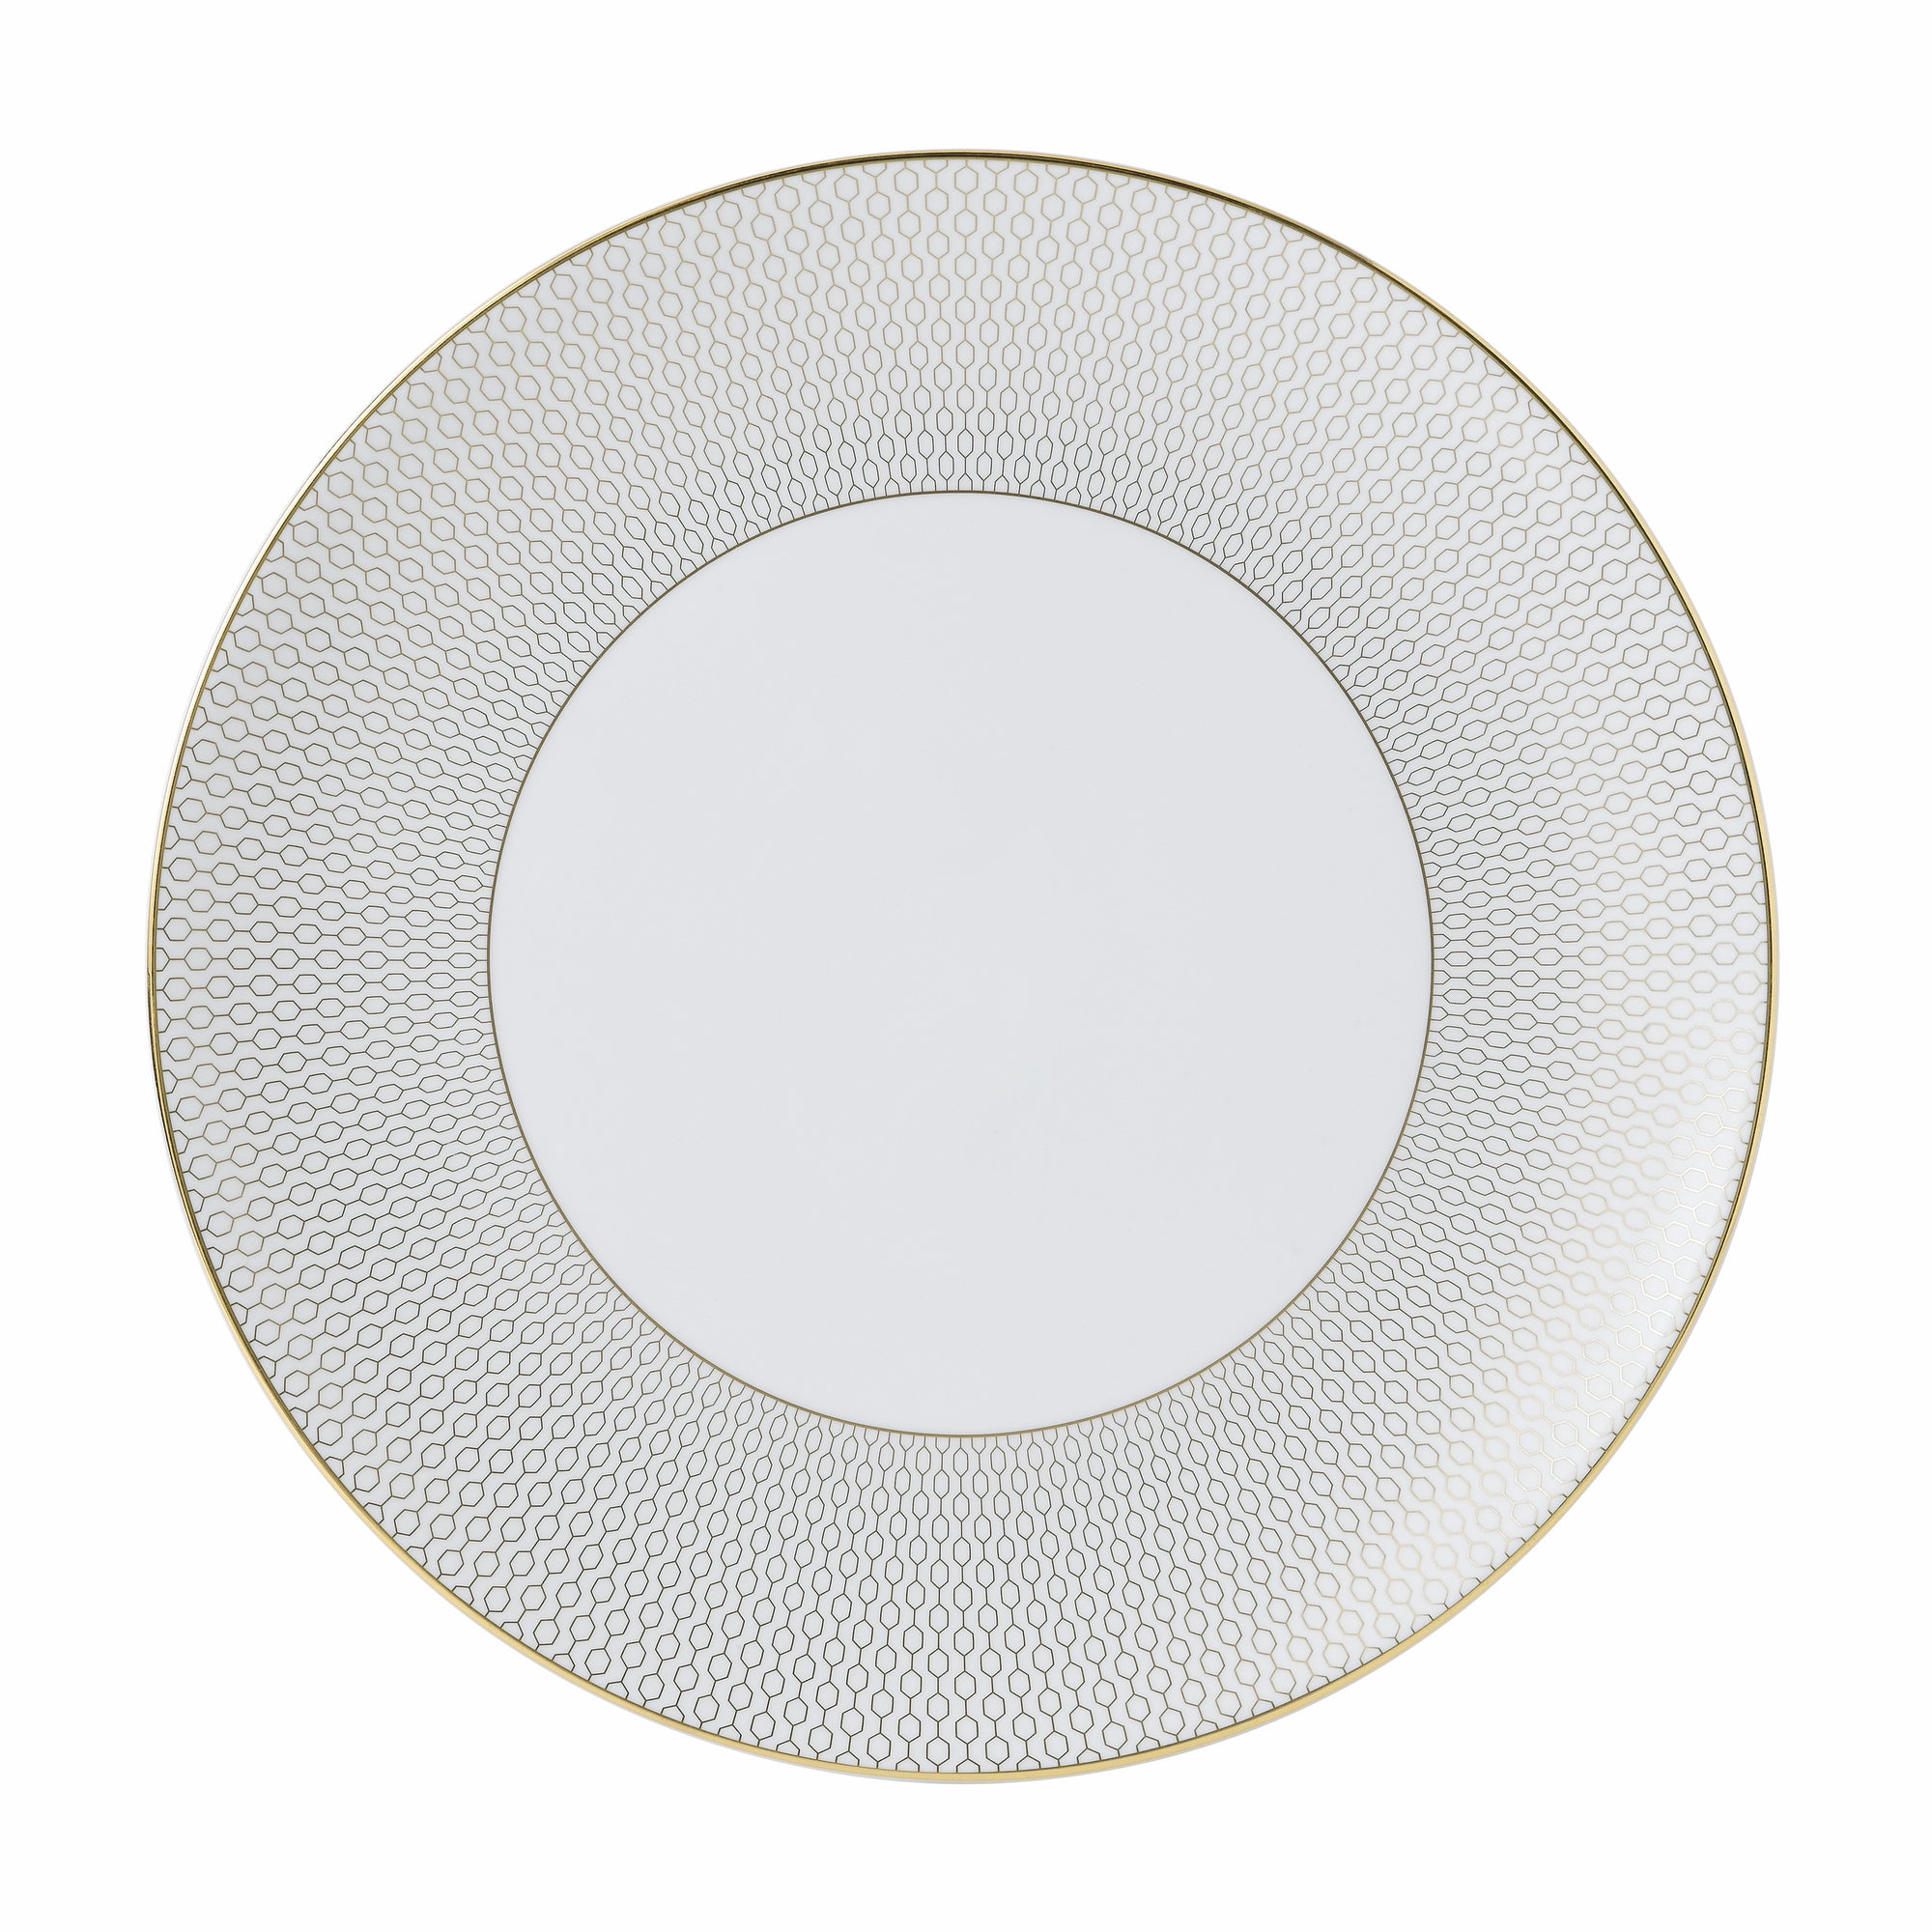 Wedgwood Gio Gold 31cm Plate